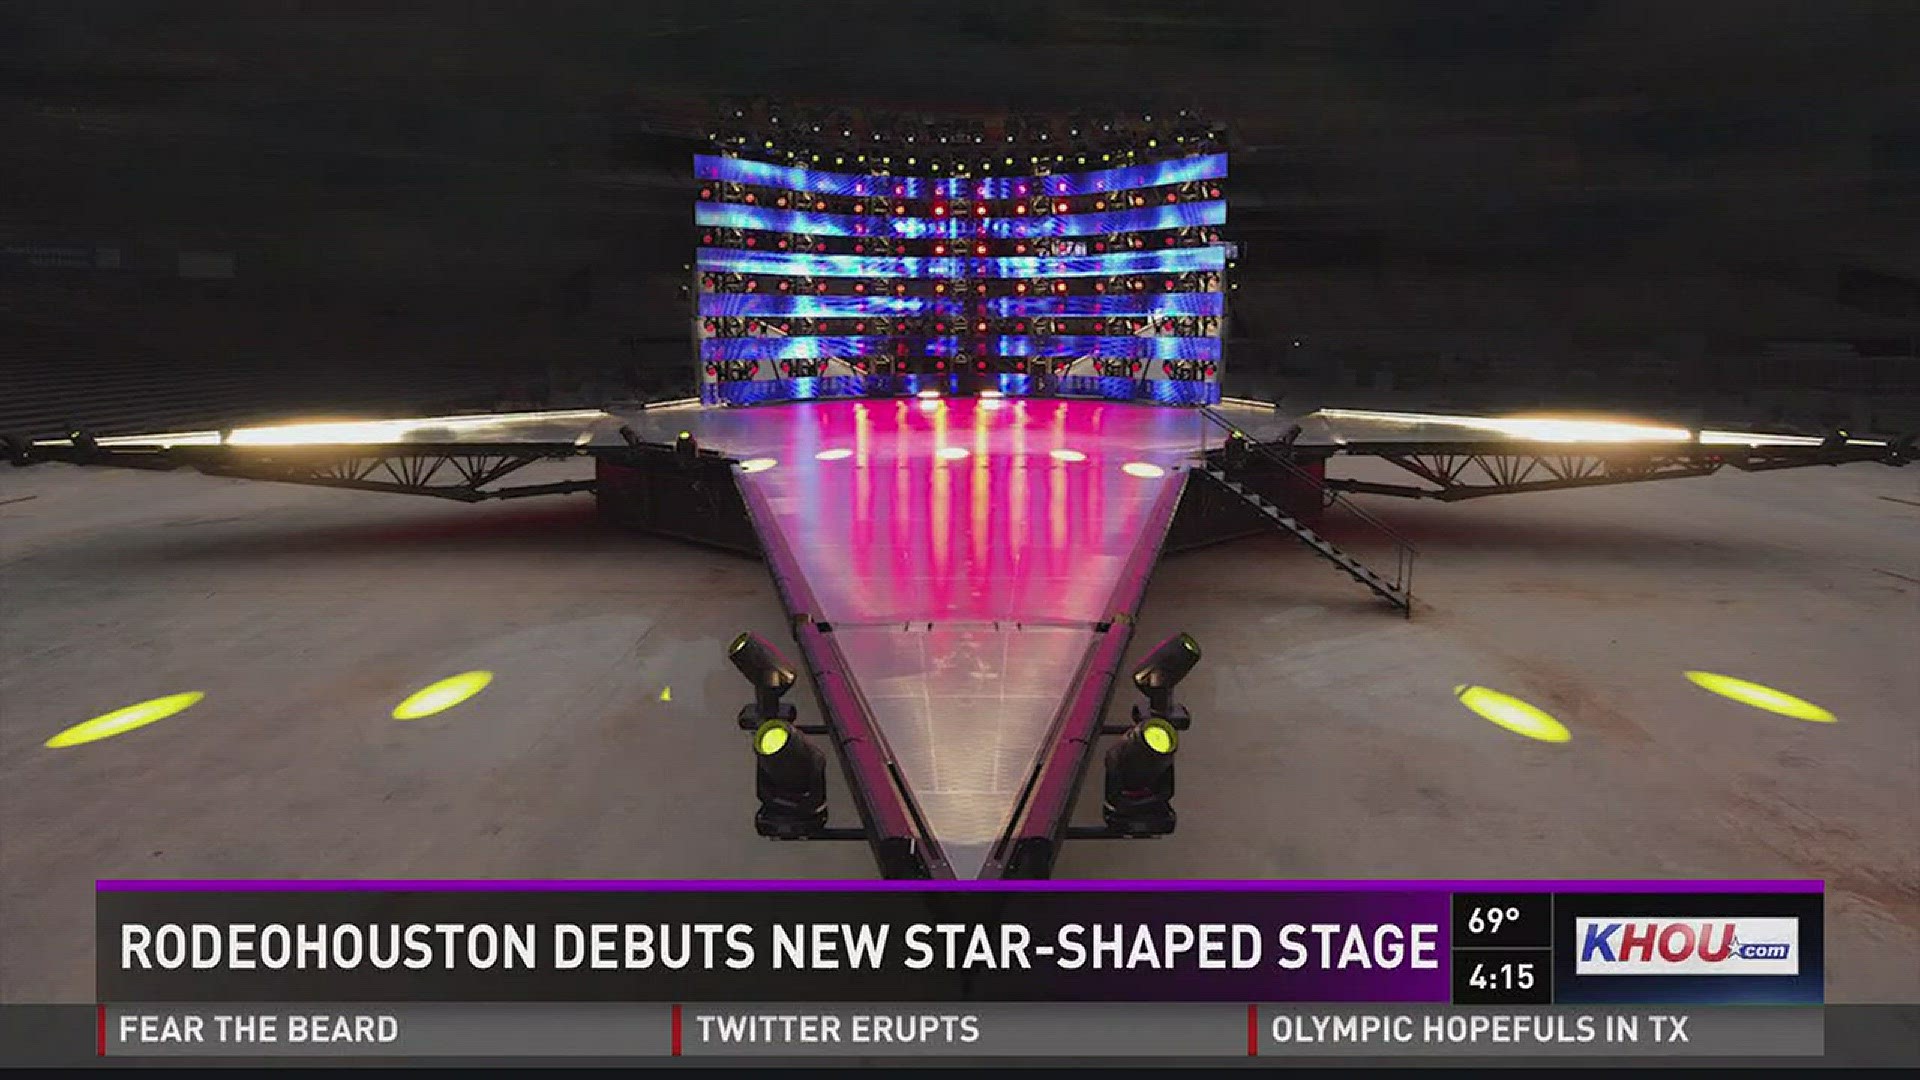 RodeoHouston unveiled its brand new Texas-sized stage on Wednesday.